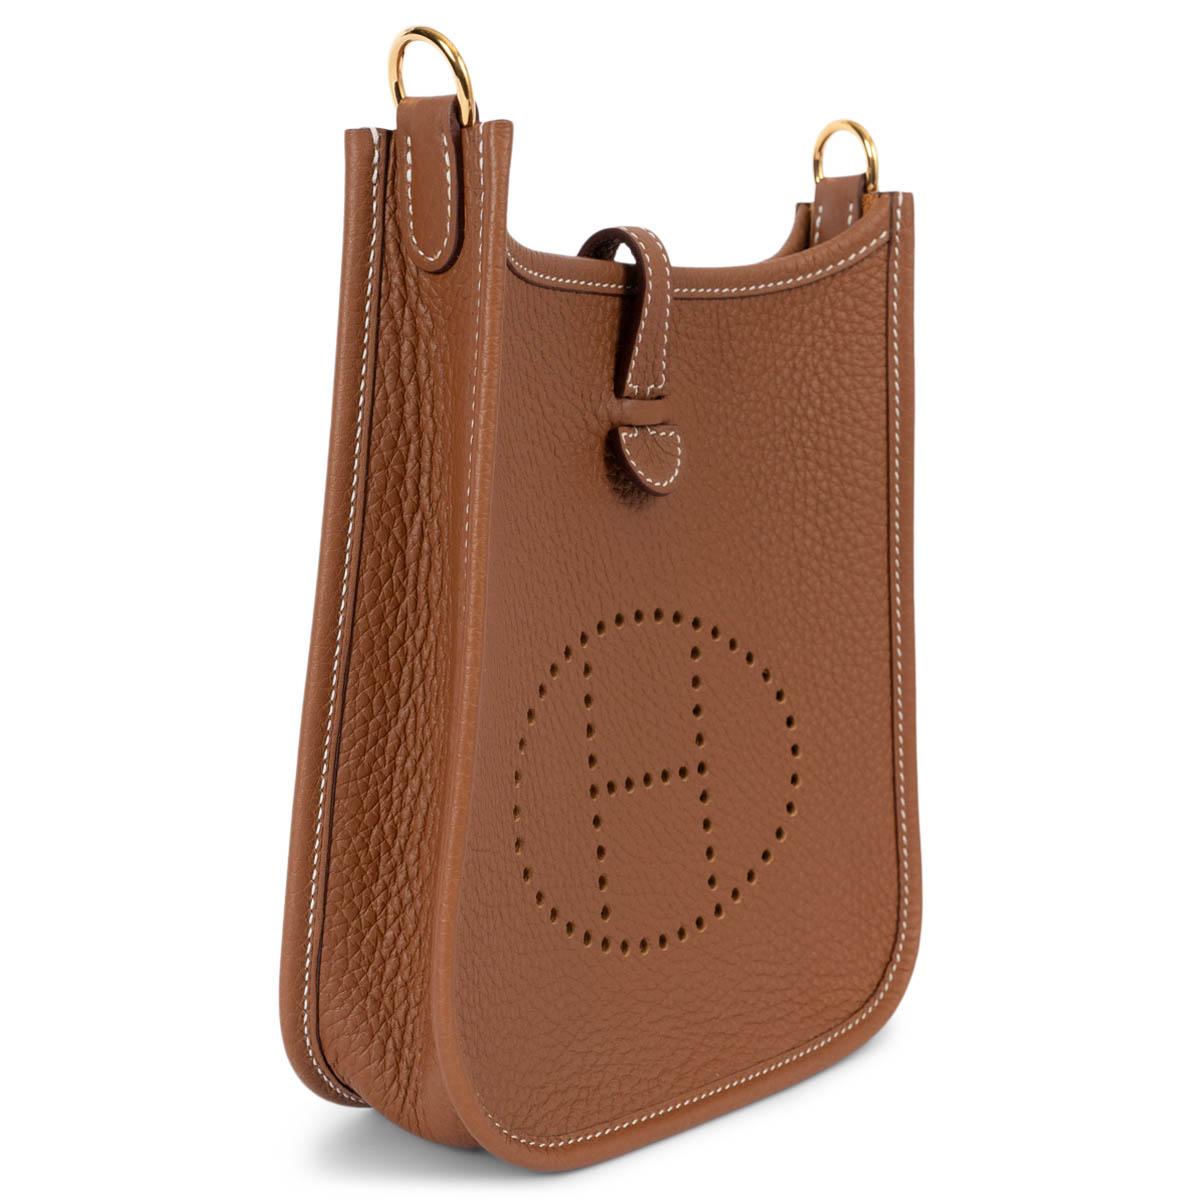 100% authentic Hermès Evelyne 16 TPM Crossbody Bag in Gold (camel) Taurillon Clemence leather with a gold wool sangle strap, perforated leather 